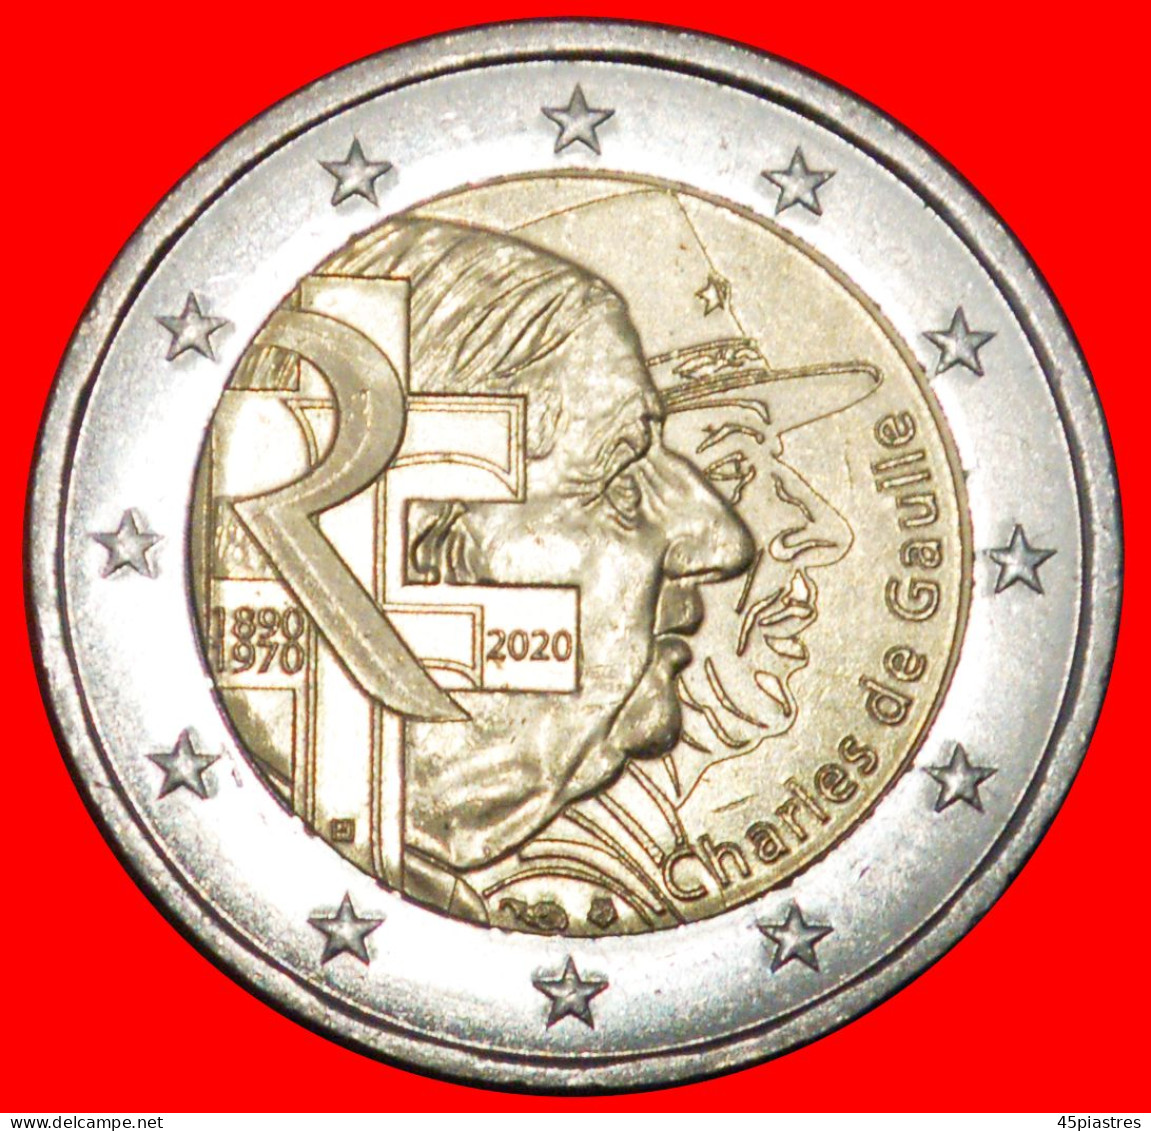 * DOUBLE CROSS 1890-1970: FRANCE  2 EURO 2020! LIBERATION FROM GERMANY! UNC MINT LUSTRE!· LOW START ·  NO RESERVE! - Francia